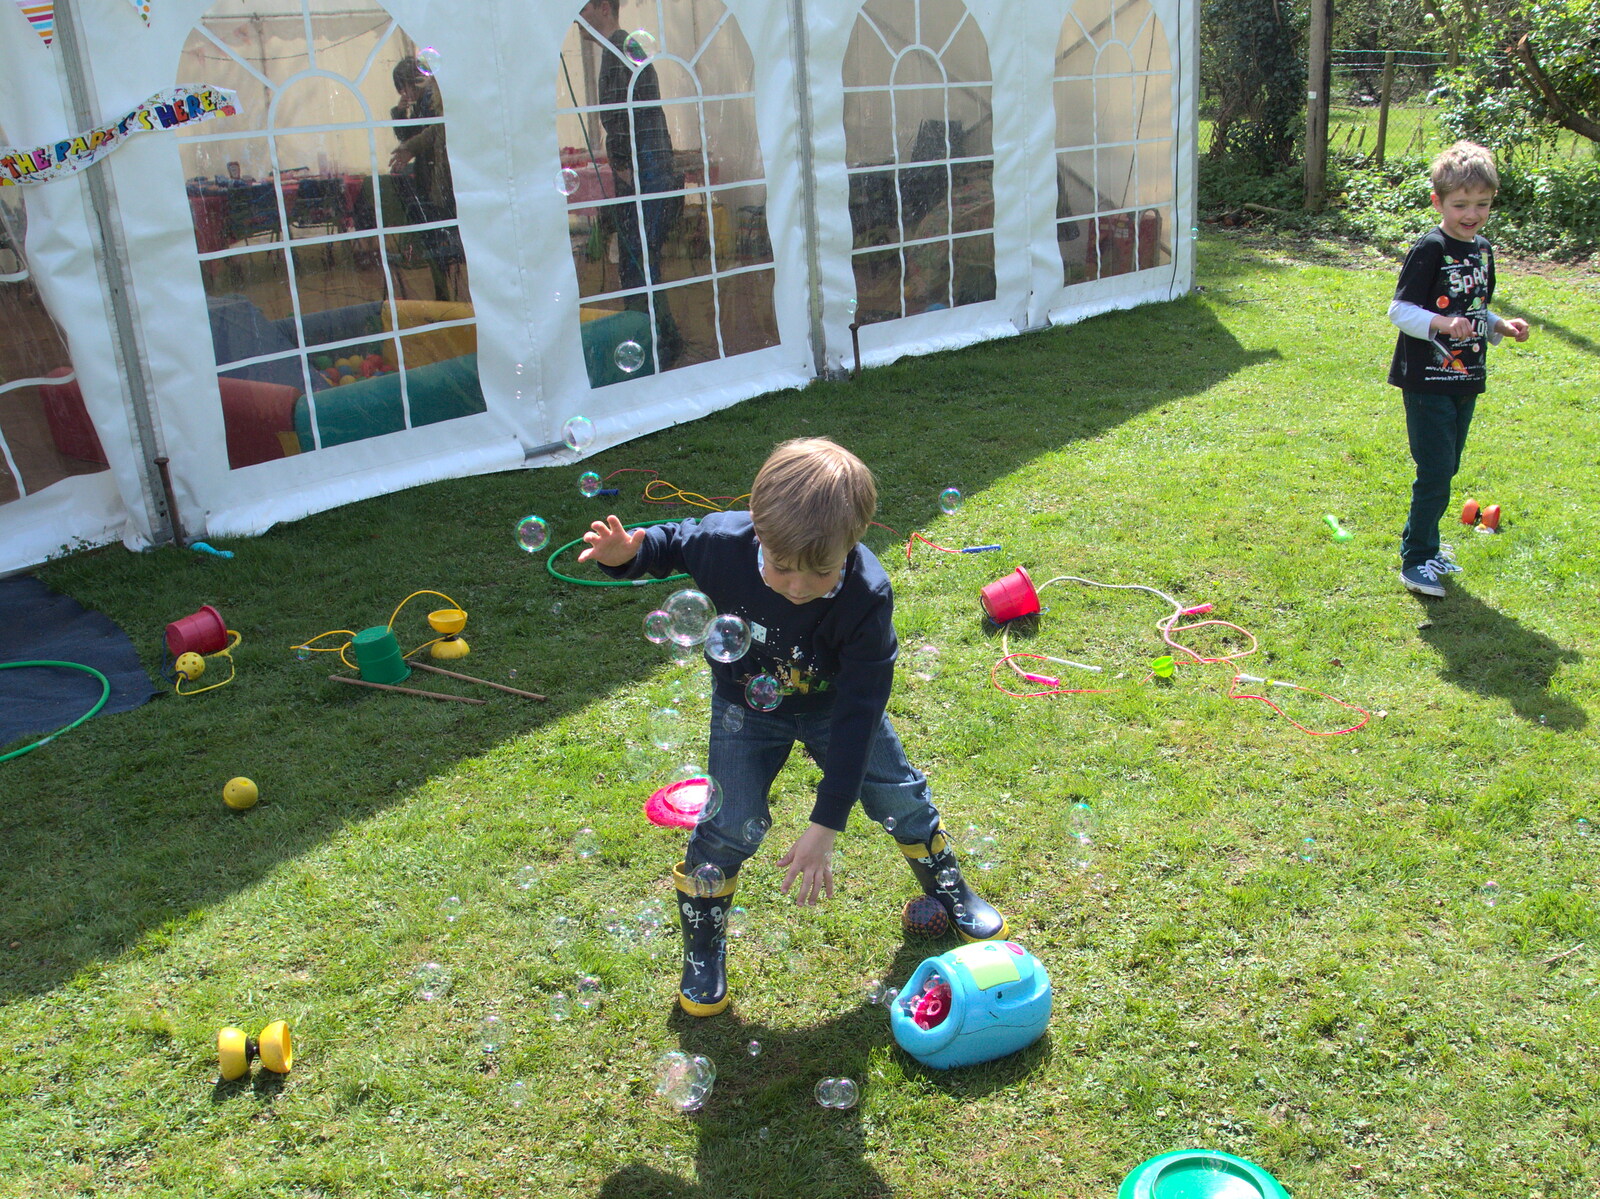 Henry's on the bubble machine from Making Dens: Rosie's Birthday, Thornham, Suffolk - 25th April 2015